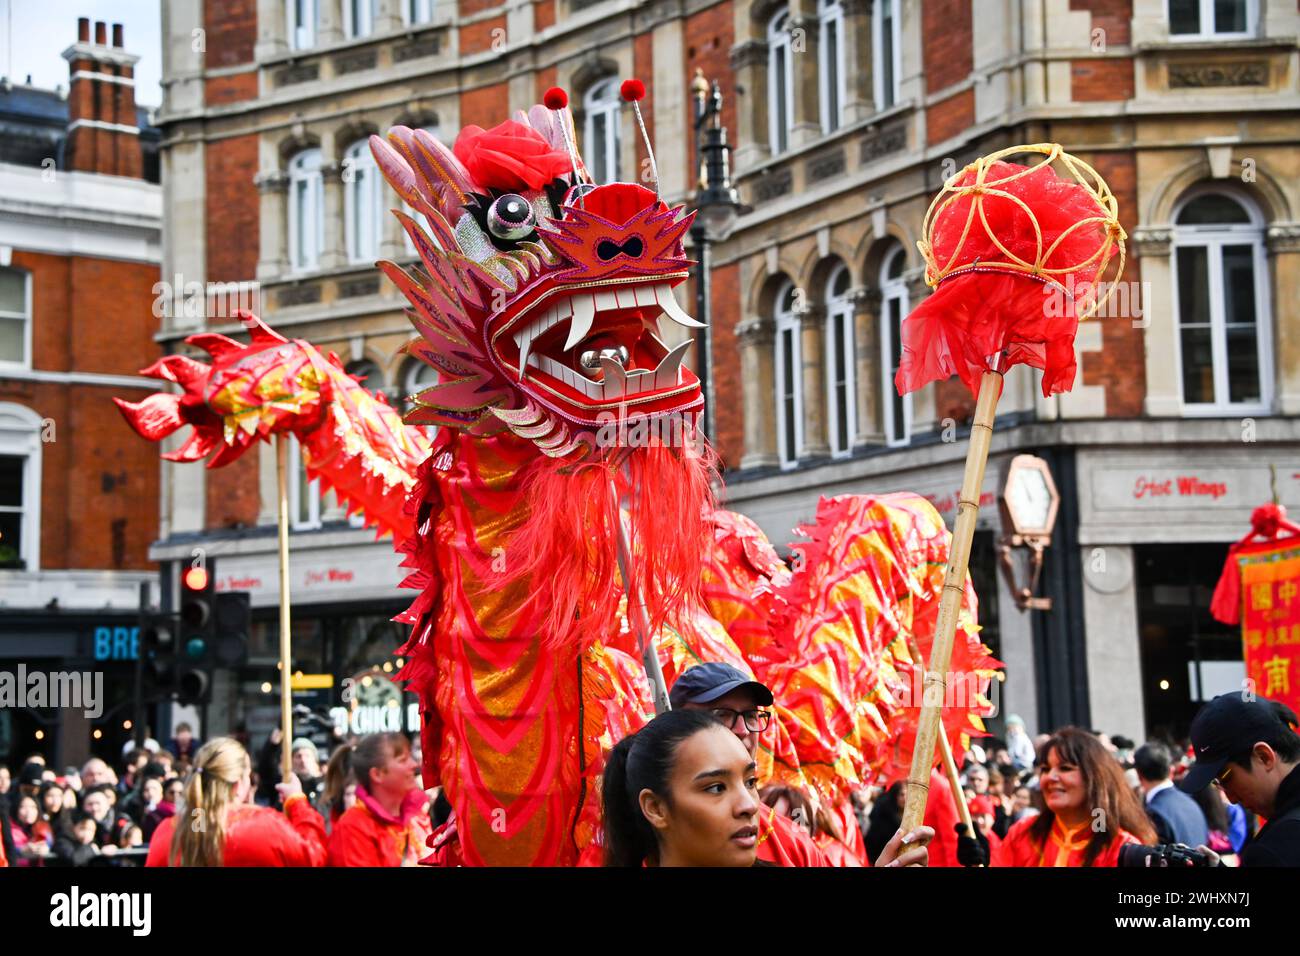 Charing Cross road, London, UK. 11th Feb, 2024. The Chinese New Year parade has many dragons representing the Year of the Dragon. Thousands of people attended the Chinese celebration in London, which saw paraders dressed in traditional Chinese costumes, Chinese style floats, lion dances, and dragon dances performed. The 2024 Lunar New Year is the Year of the Dragon. The Chinese Community in London, UK organized a parade along Charing Cross Road in London Chinatown and performed in Trafalgar Square. Credit: See Li/Picture Capital/Alamy Live News Stock Photo